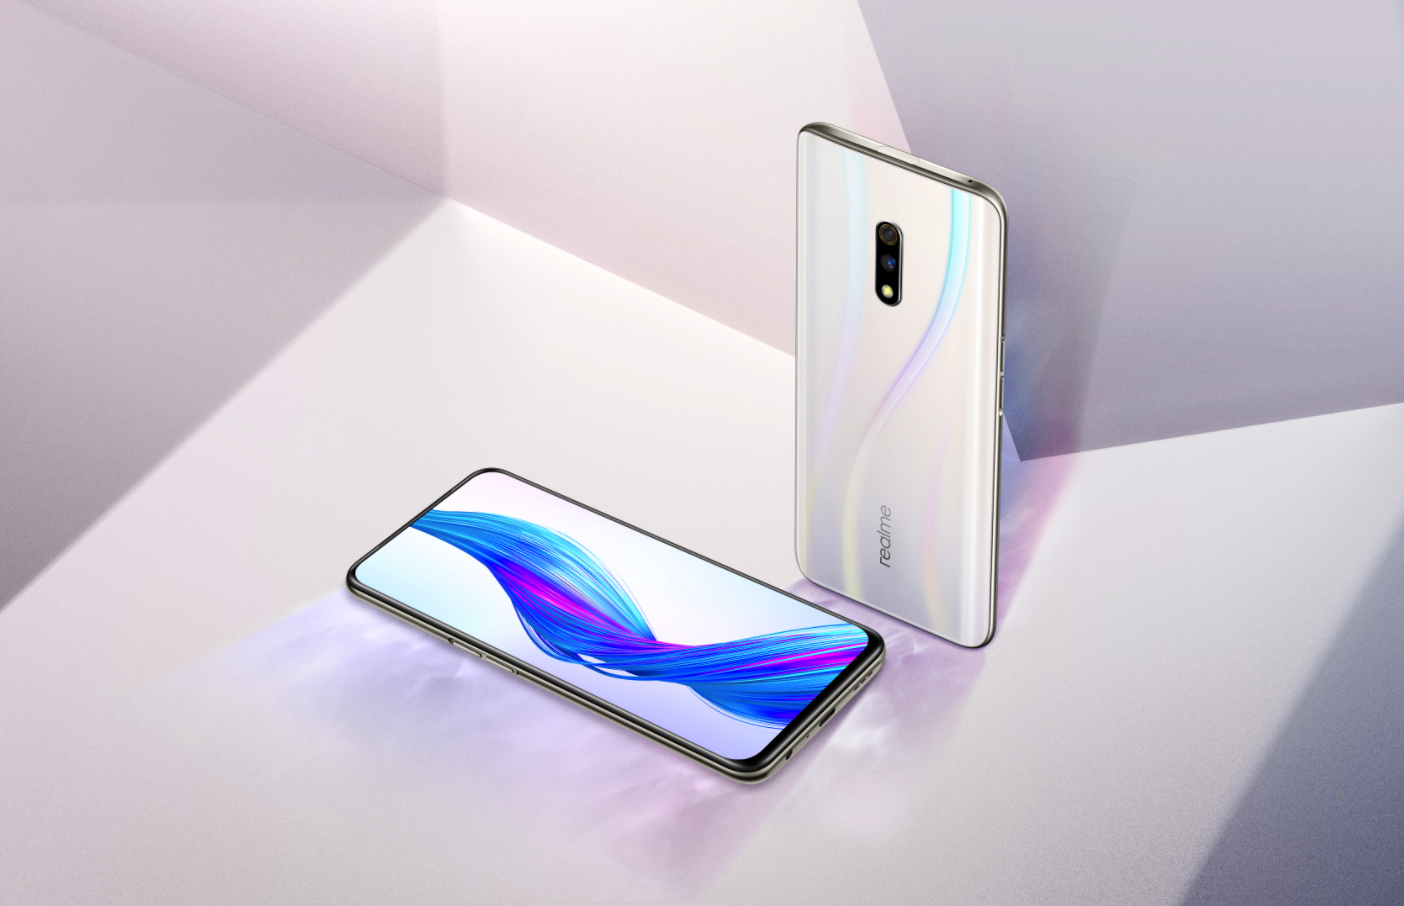 Realme becomes fastest growing smartphone brand in Q3 2019